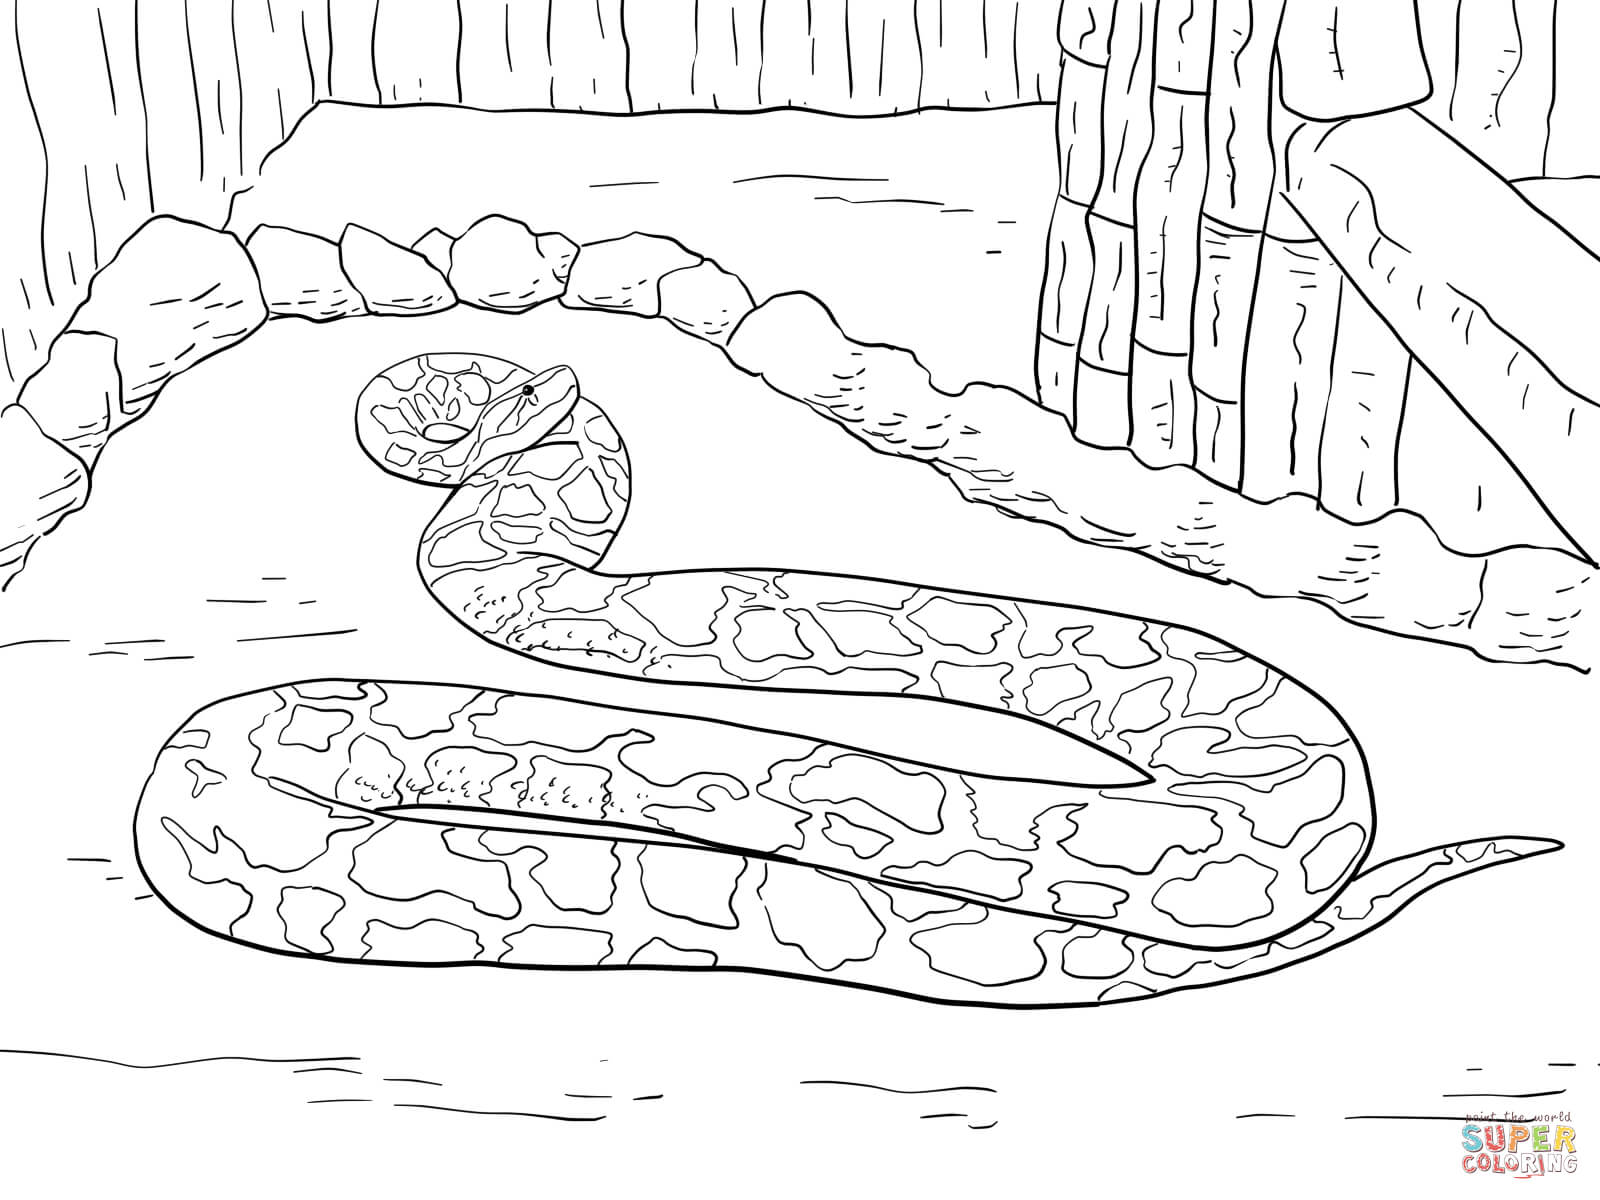 Burmese python coloring page free printable coloring pages